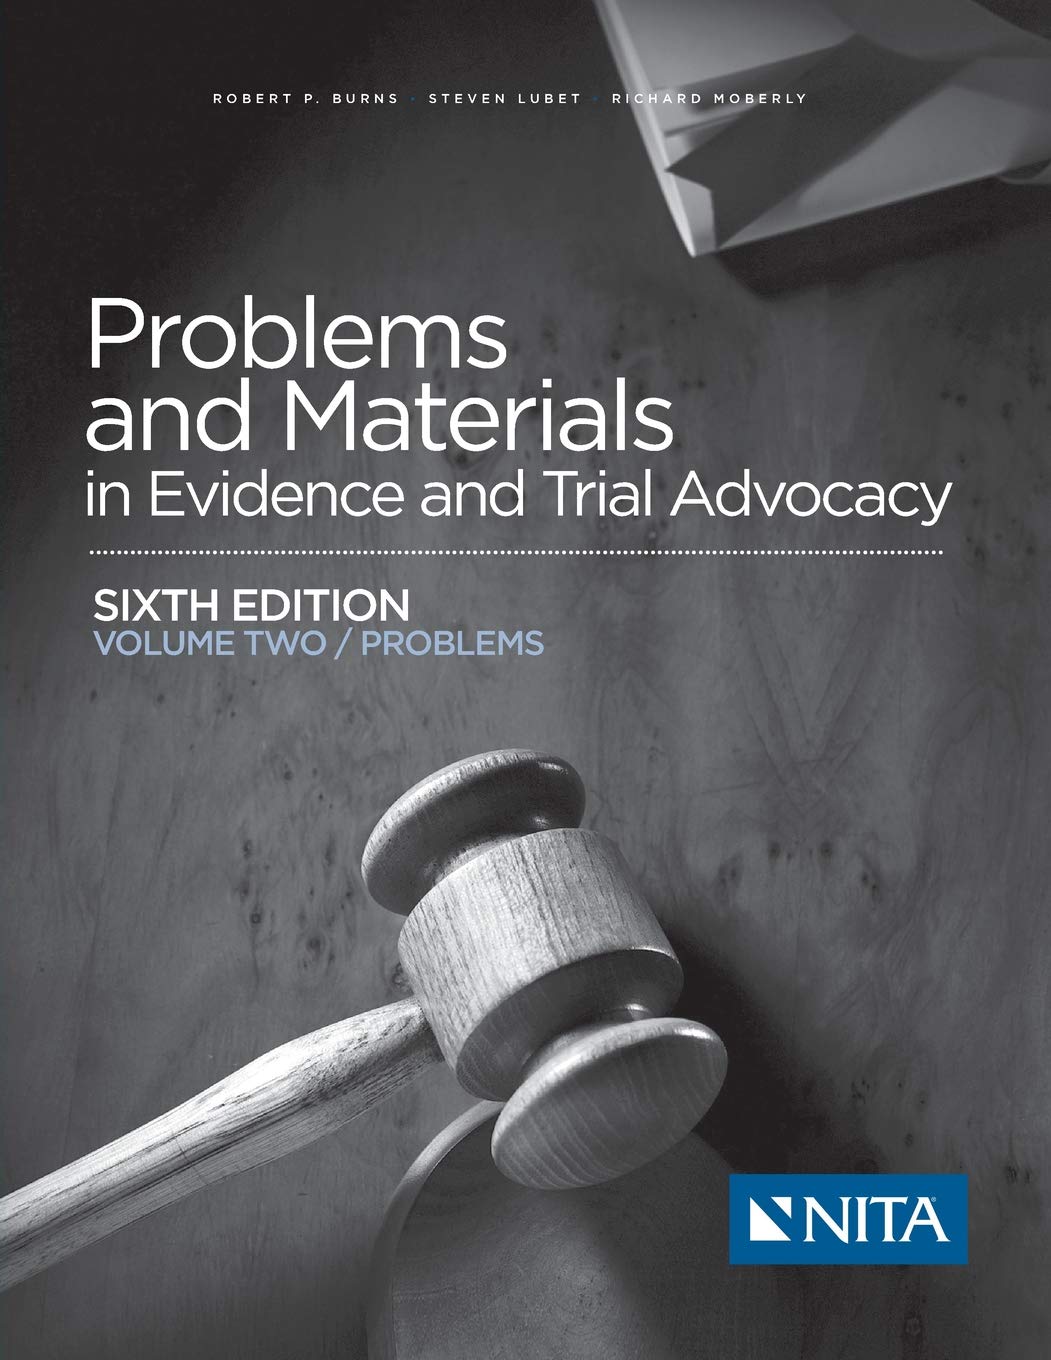 Problems and Materials in Evidence and Trial Advocacy: Sixth Edition Volme Two/Problems (Nita)